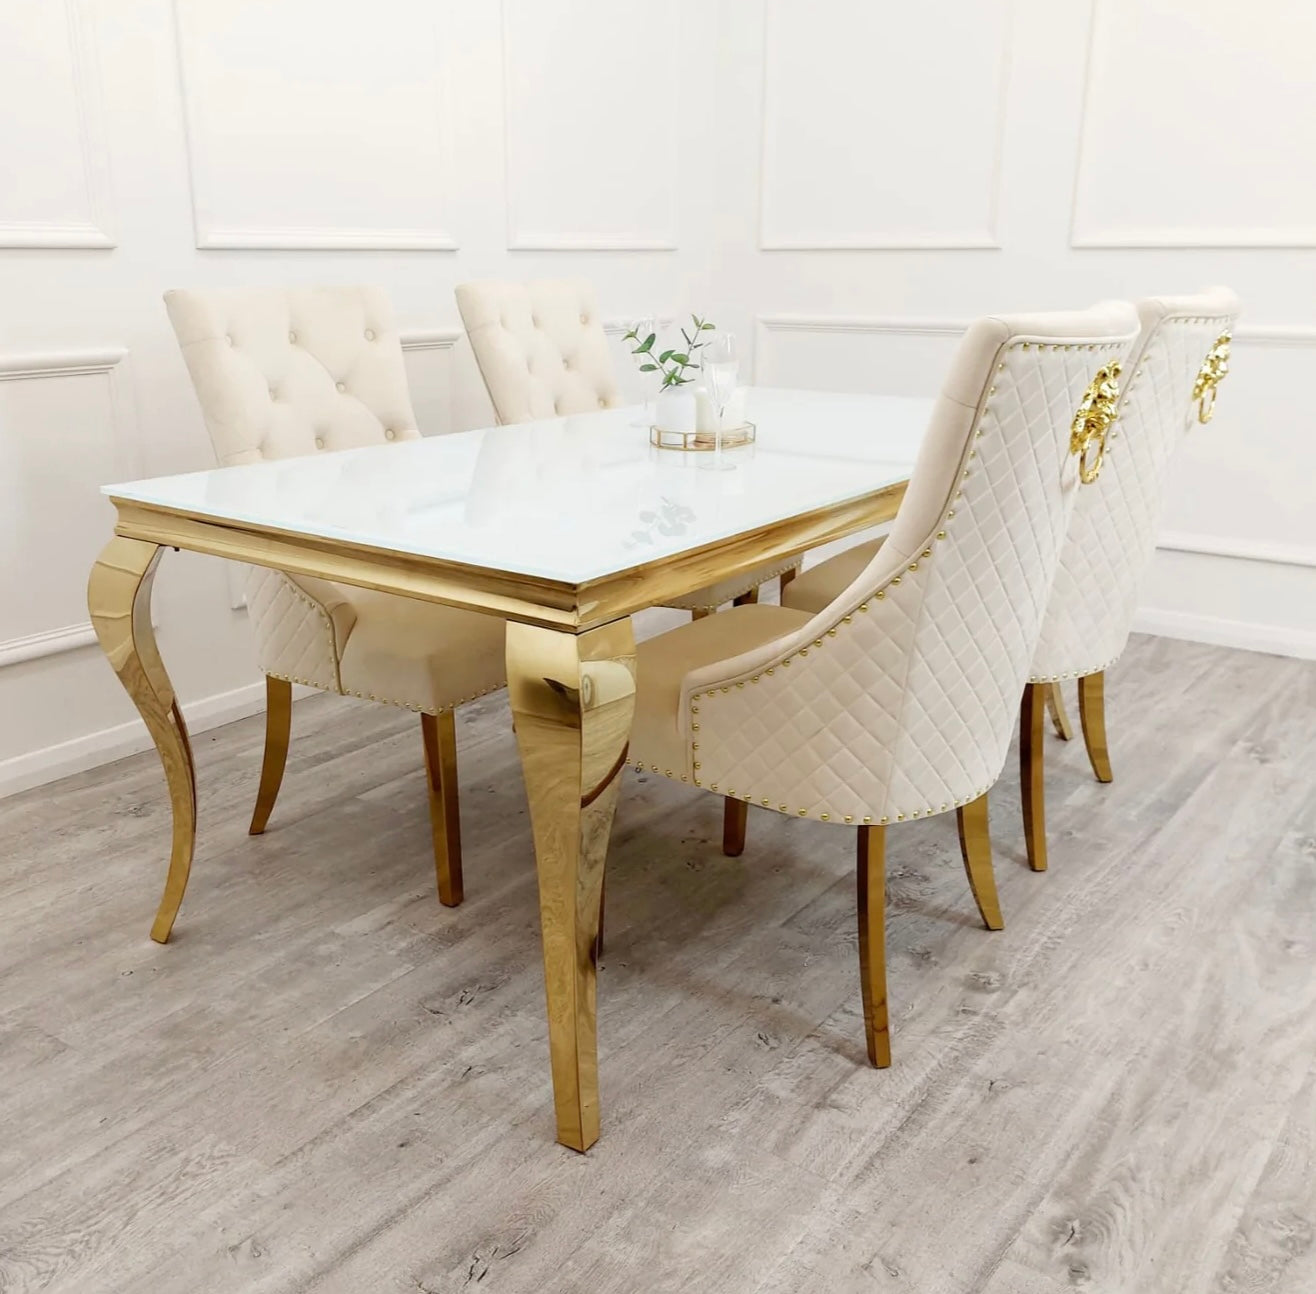 Louis gold white glass dining table with cream Bentley chairs